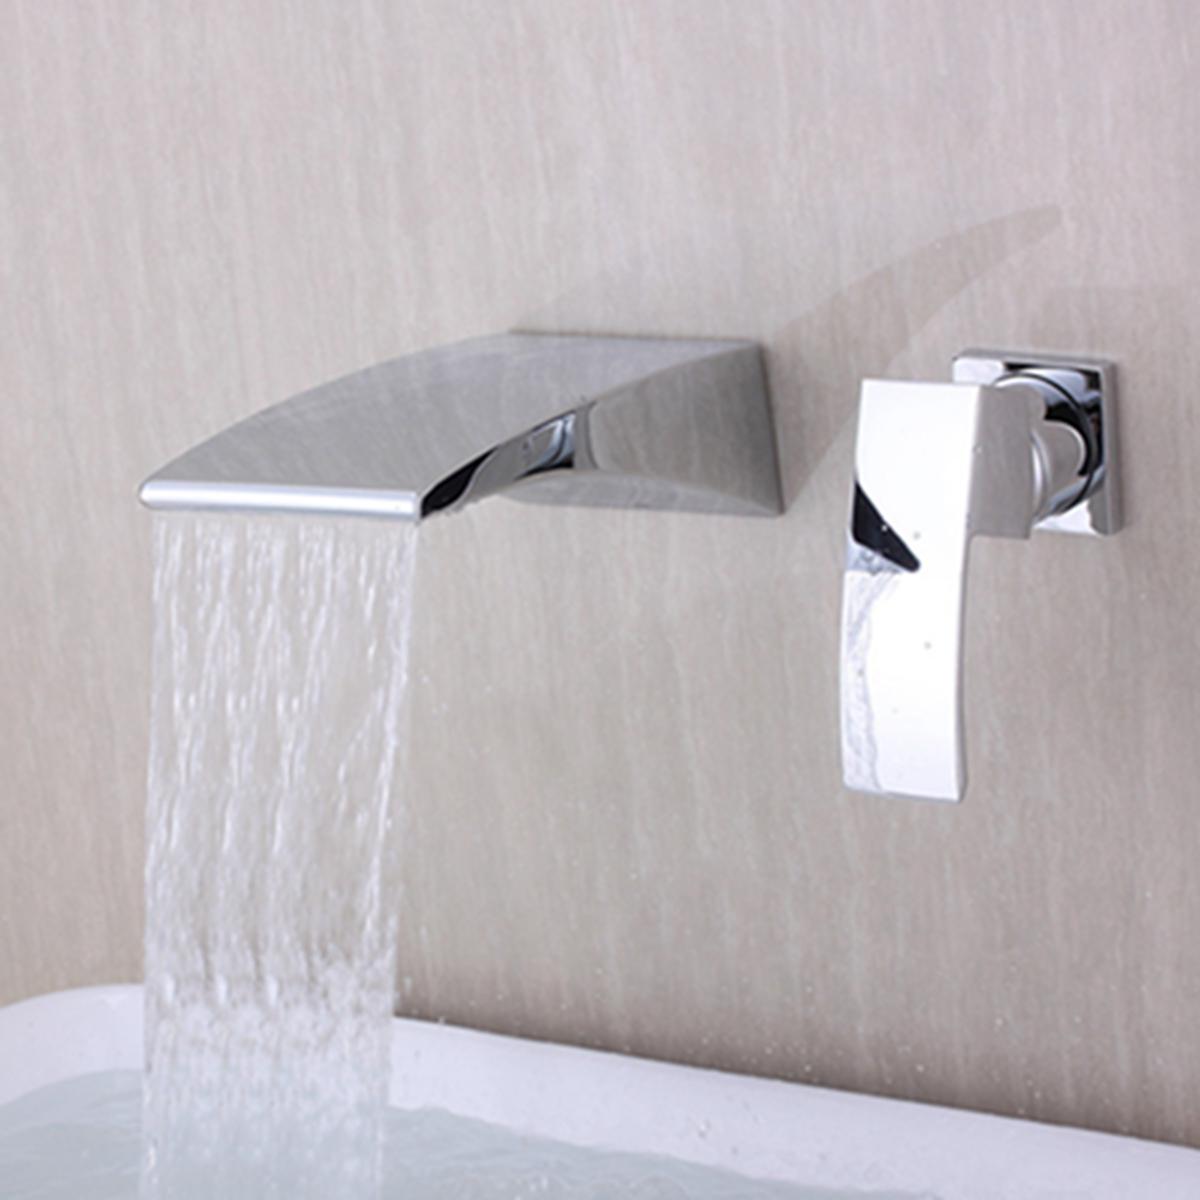 

Waterfall Curve Spout Bathroom Faucet Chrome Single Handle Wall Mount Mixer Tap